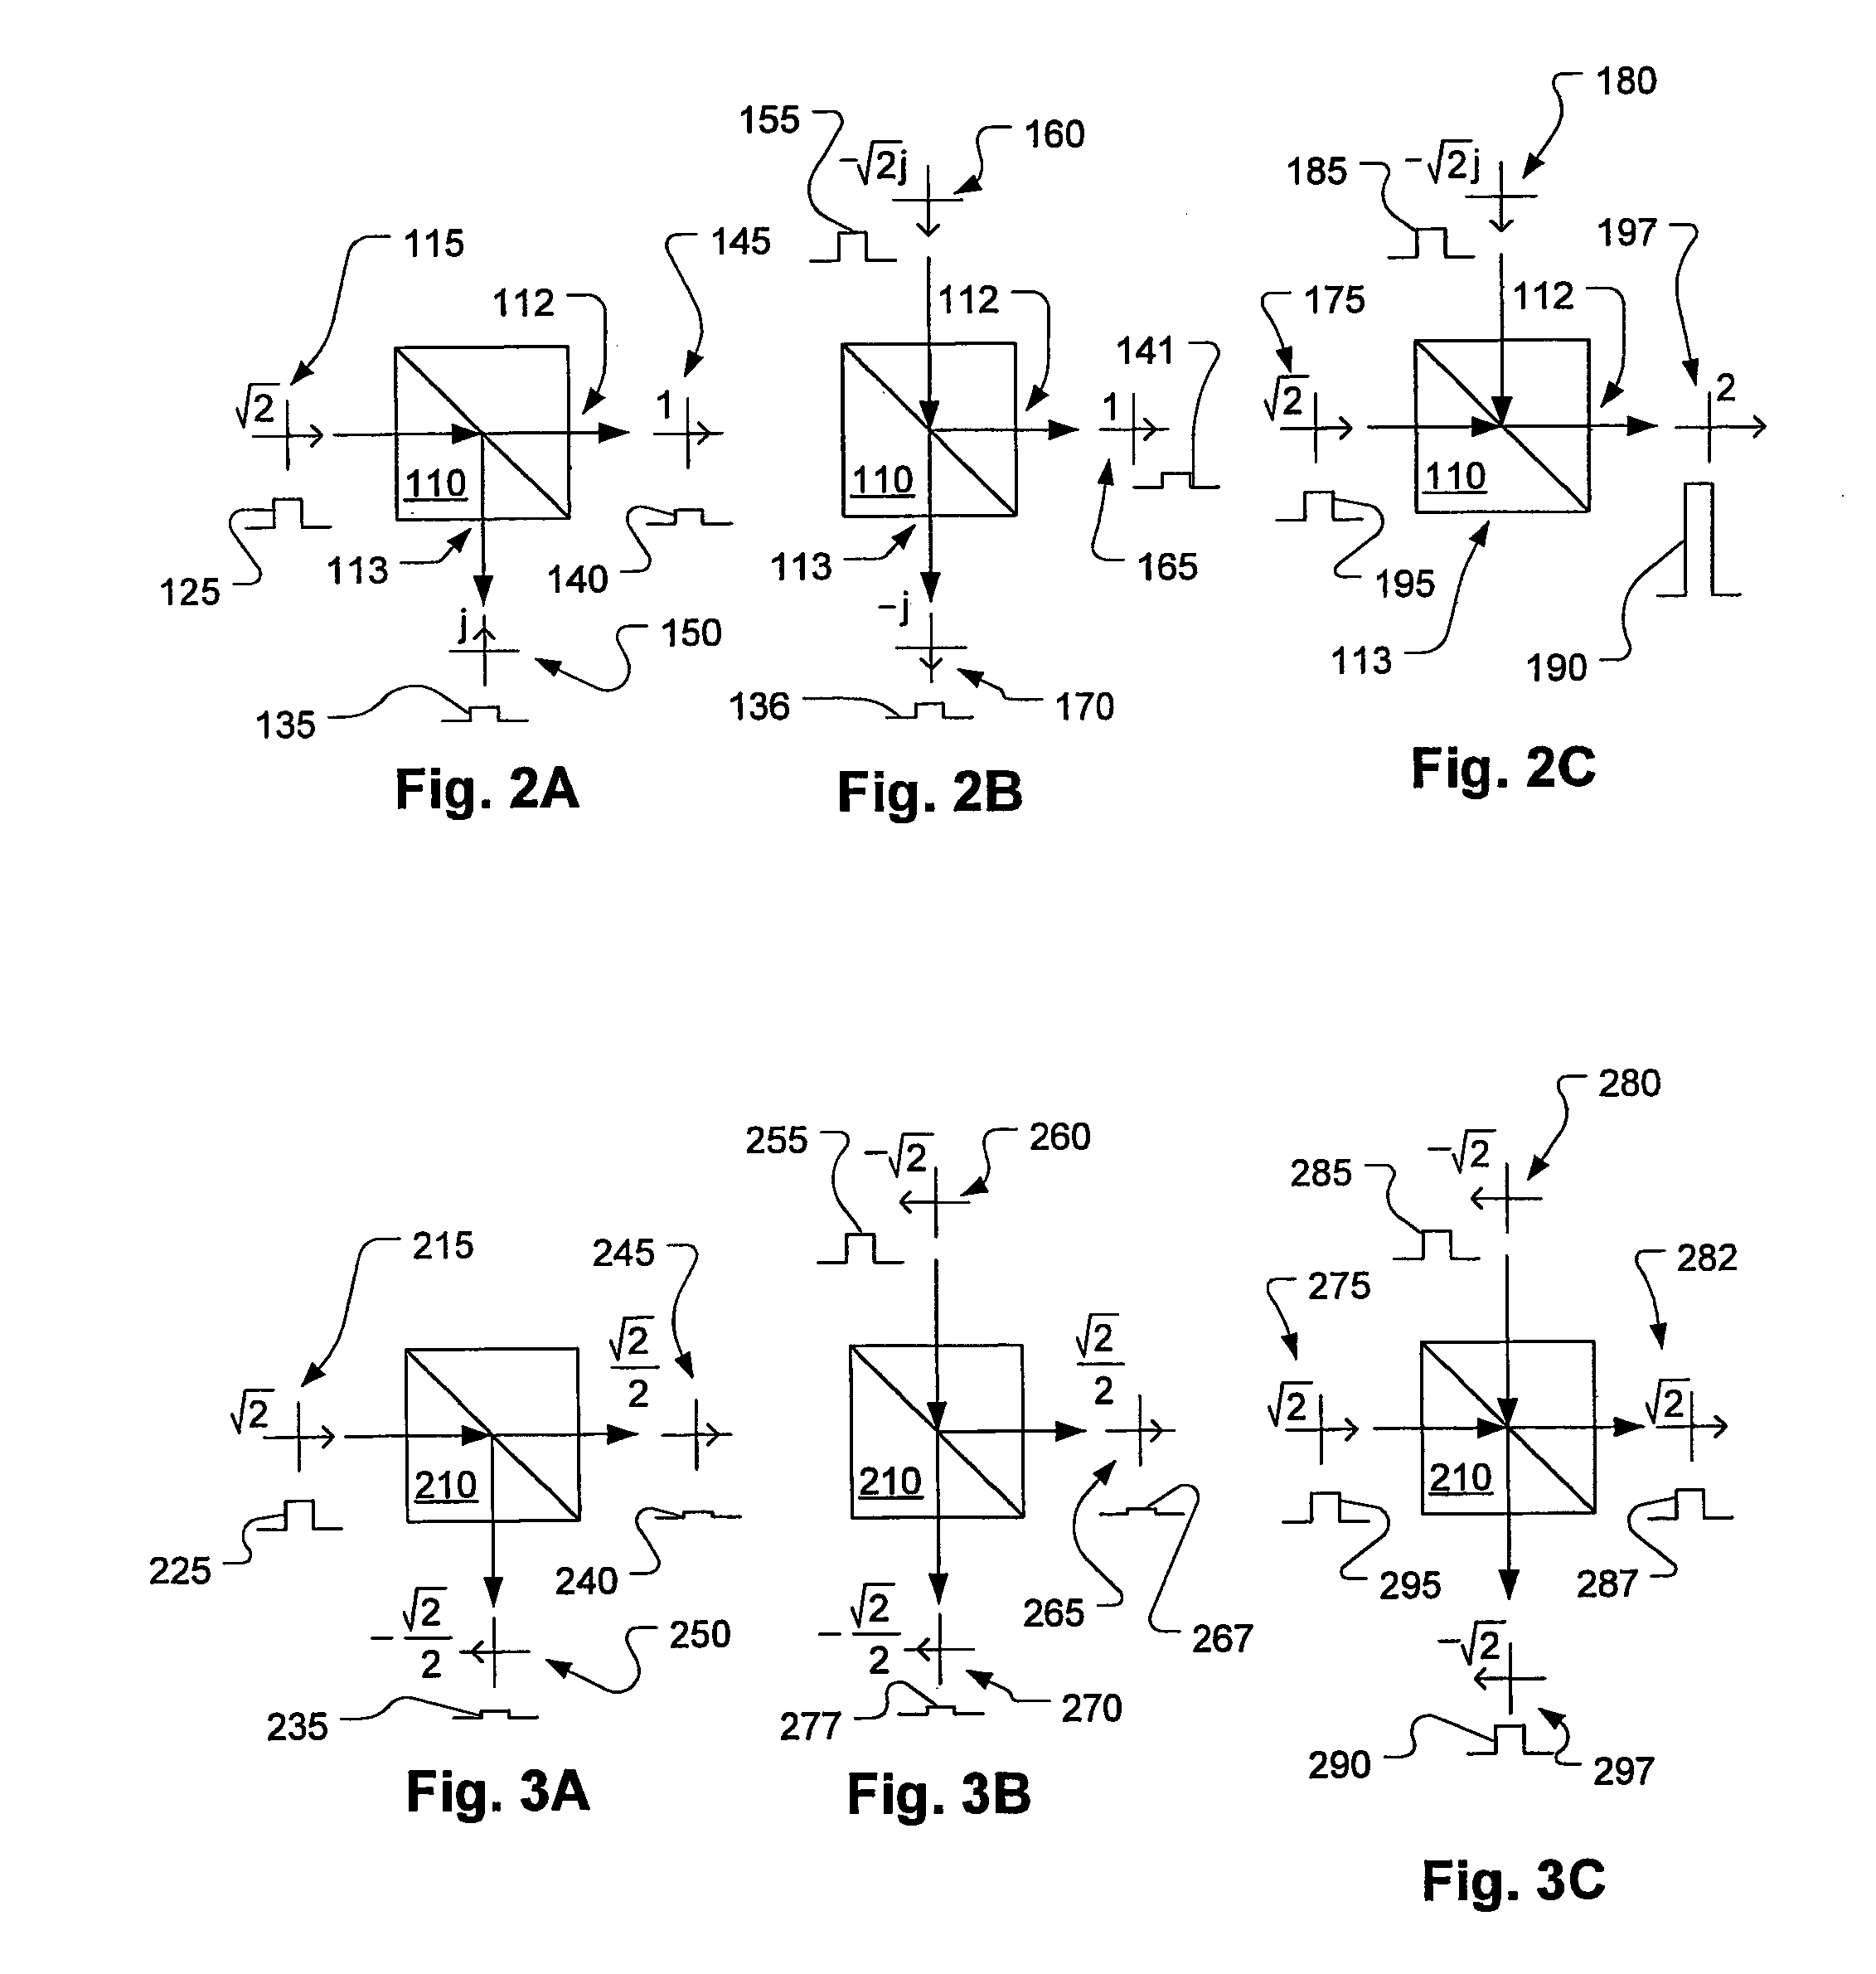 All optical decoding systems for optical encoded data symbols